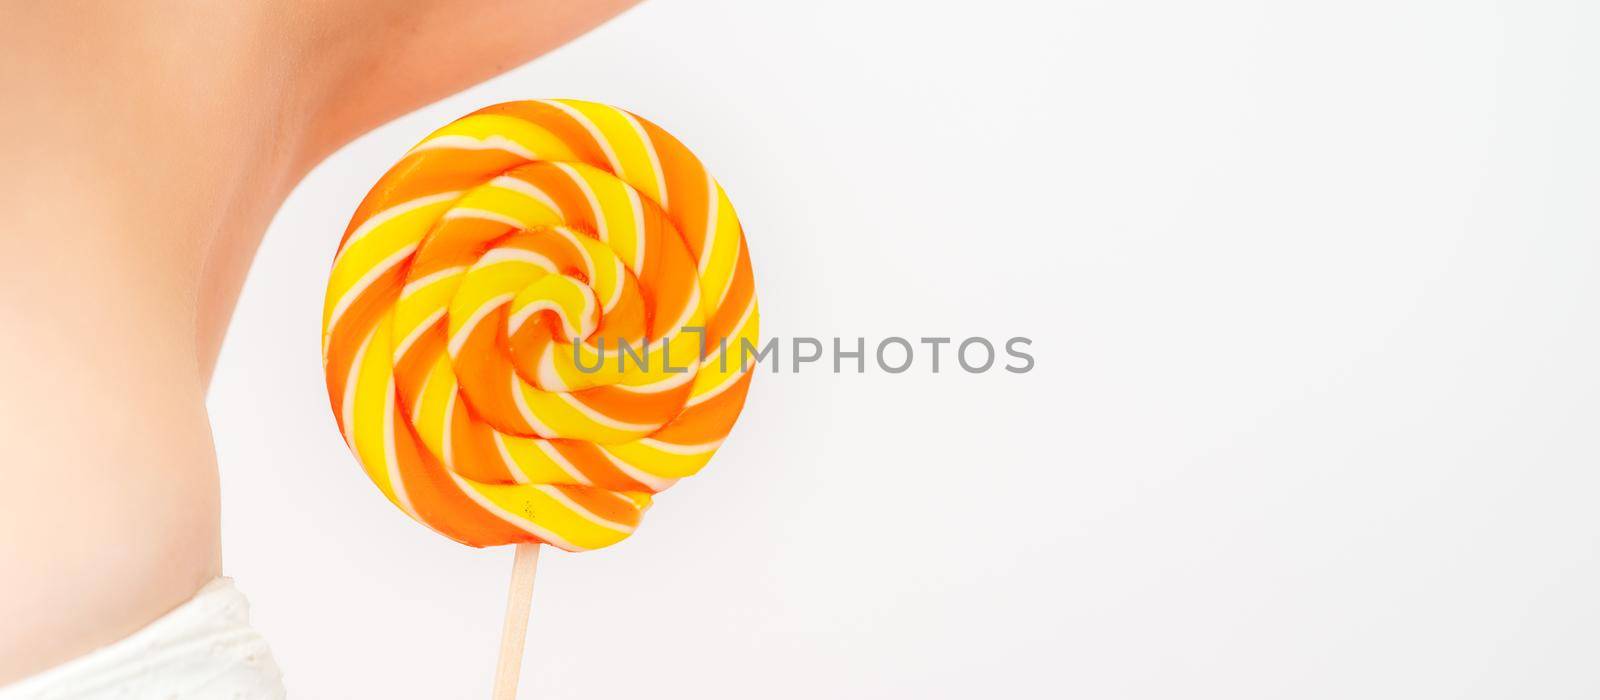 Waxing, depilation concept. A young female holds a round lollipop near her armpit on white background. by okskukuruza